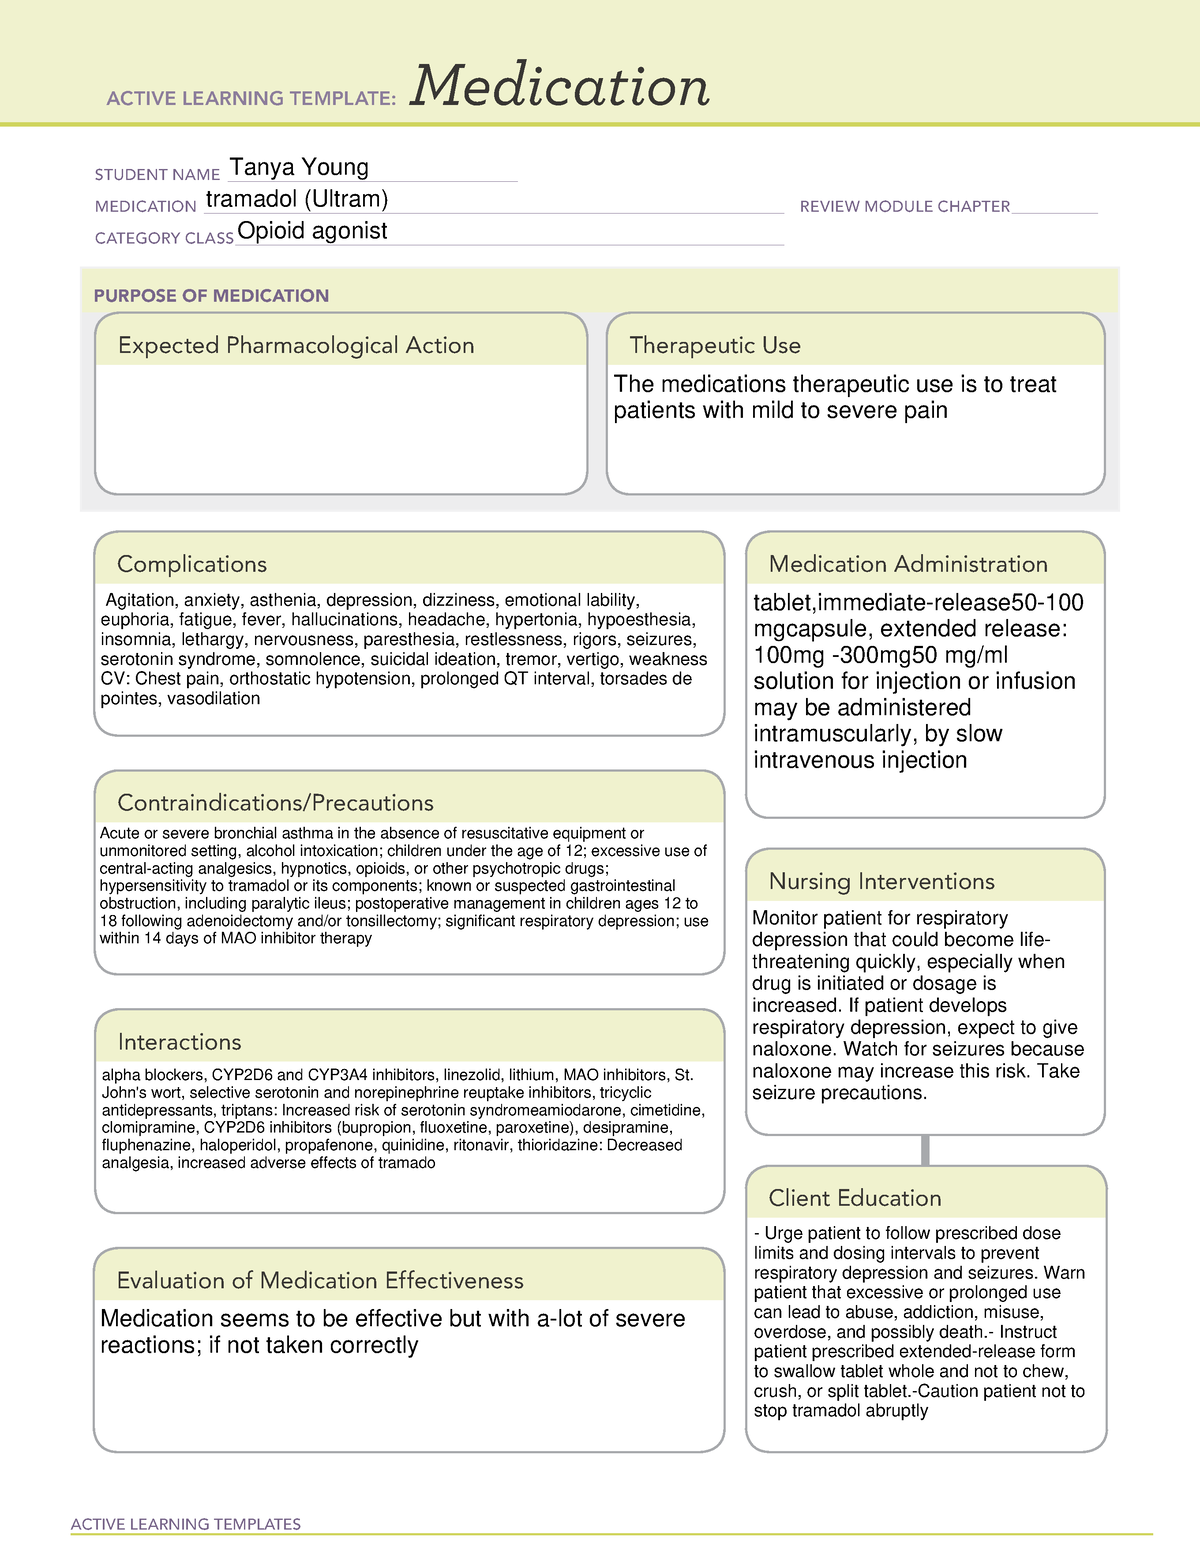 tramadol-ultram-ati-medication-template-active-learning-templates-medication-student-name